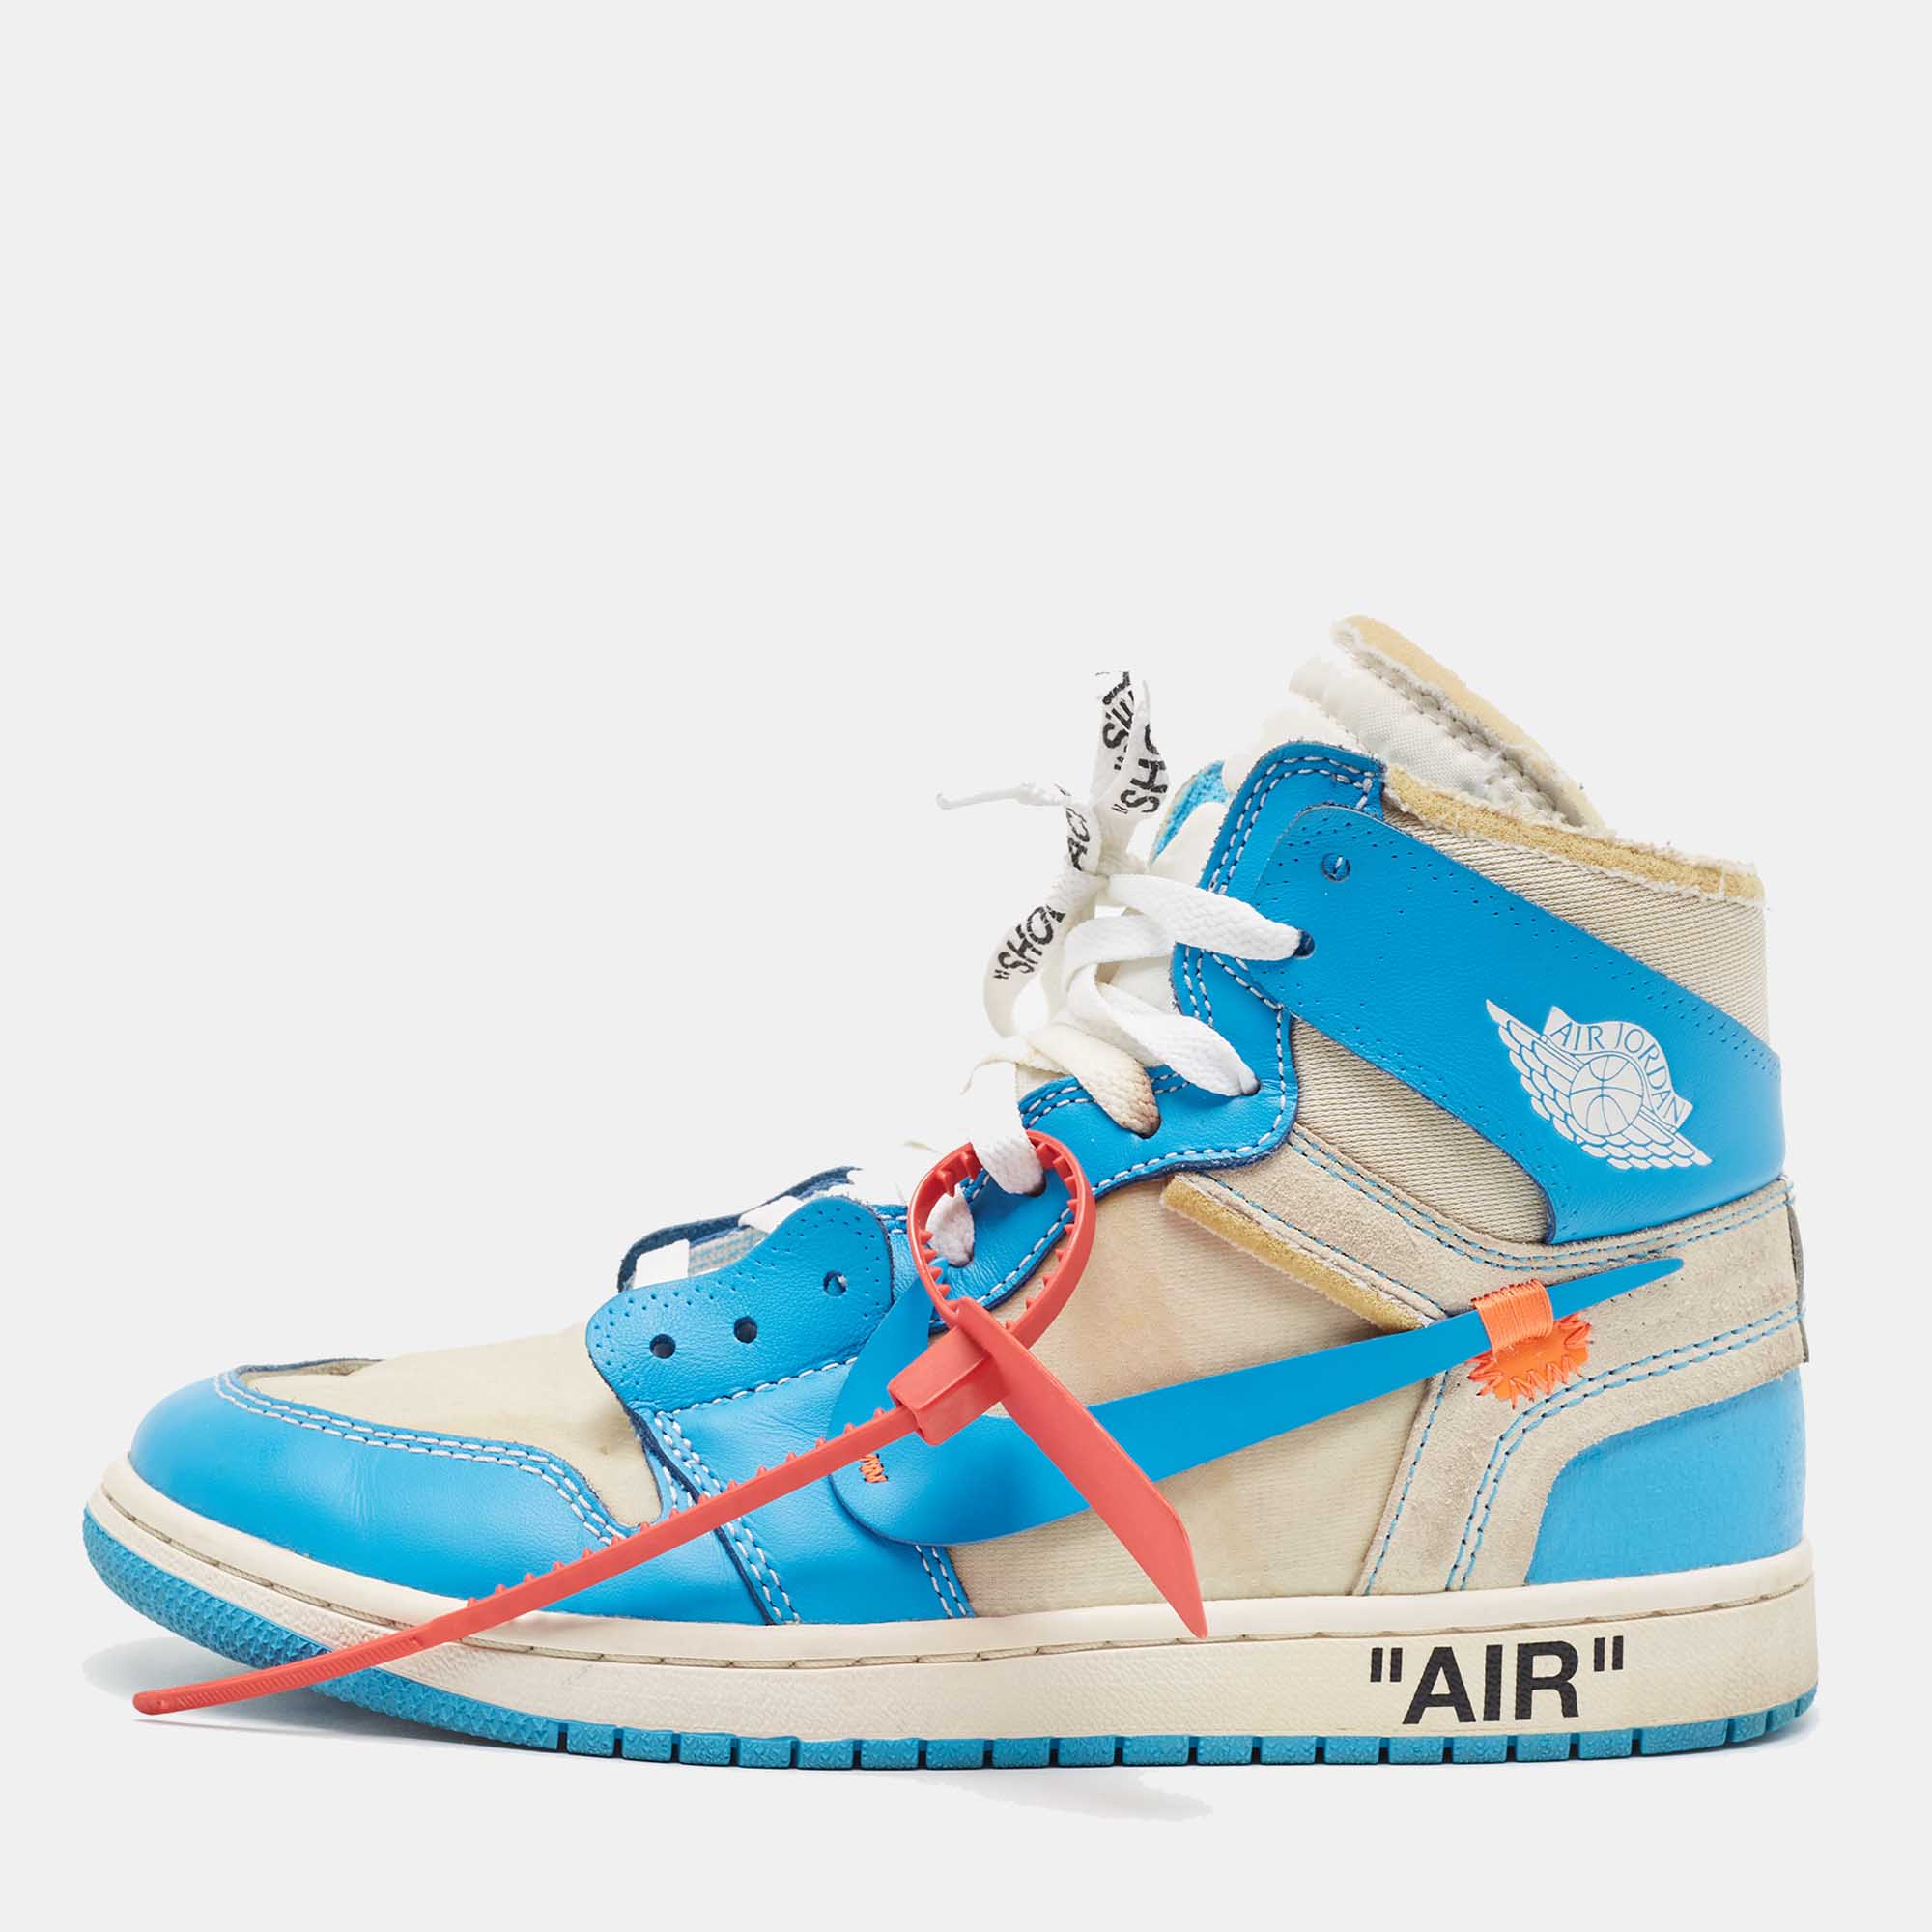 Off-White X Nike Blue/Grey Leather And Mesh Jordan 1 Retro High  Sneakers Size 40.5